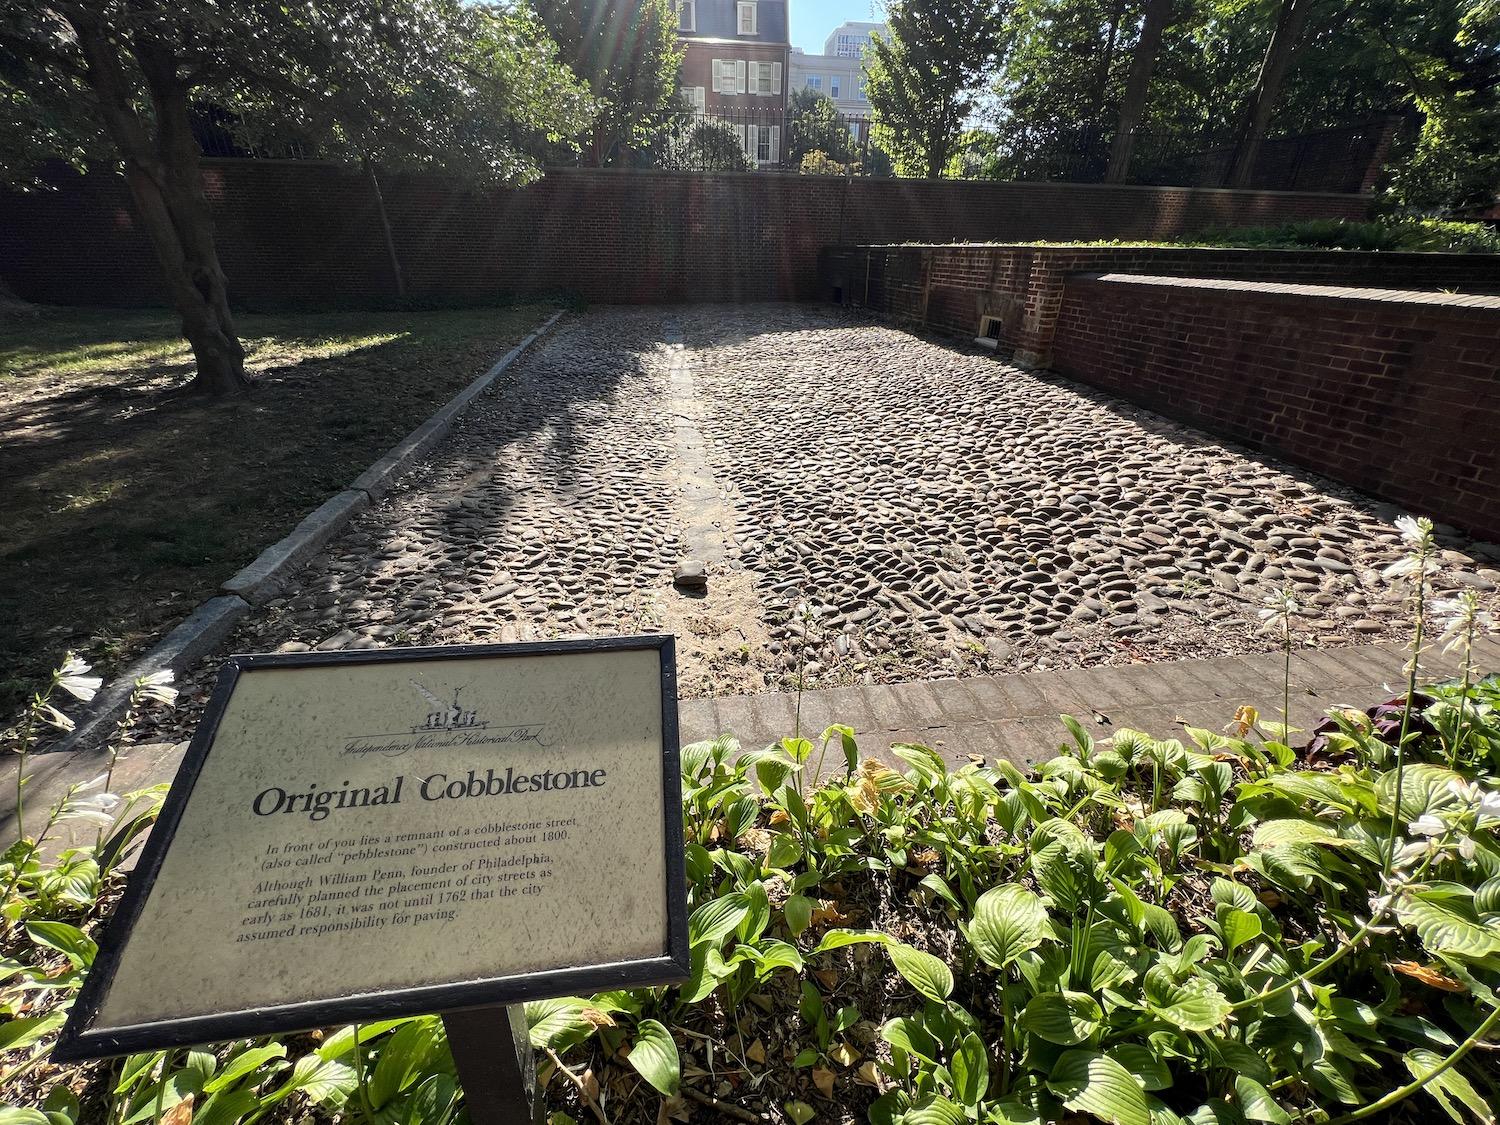 A patch of historic cobblestone has been preserved in the Rose Garden in Independence National Historical Park.